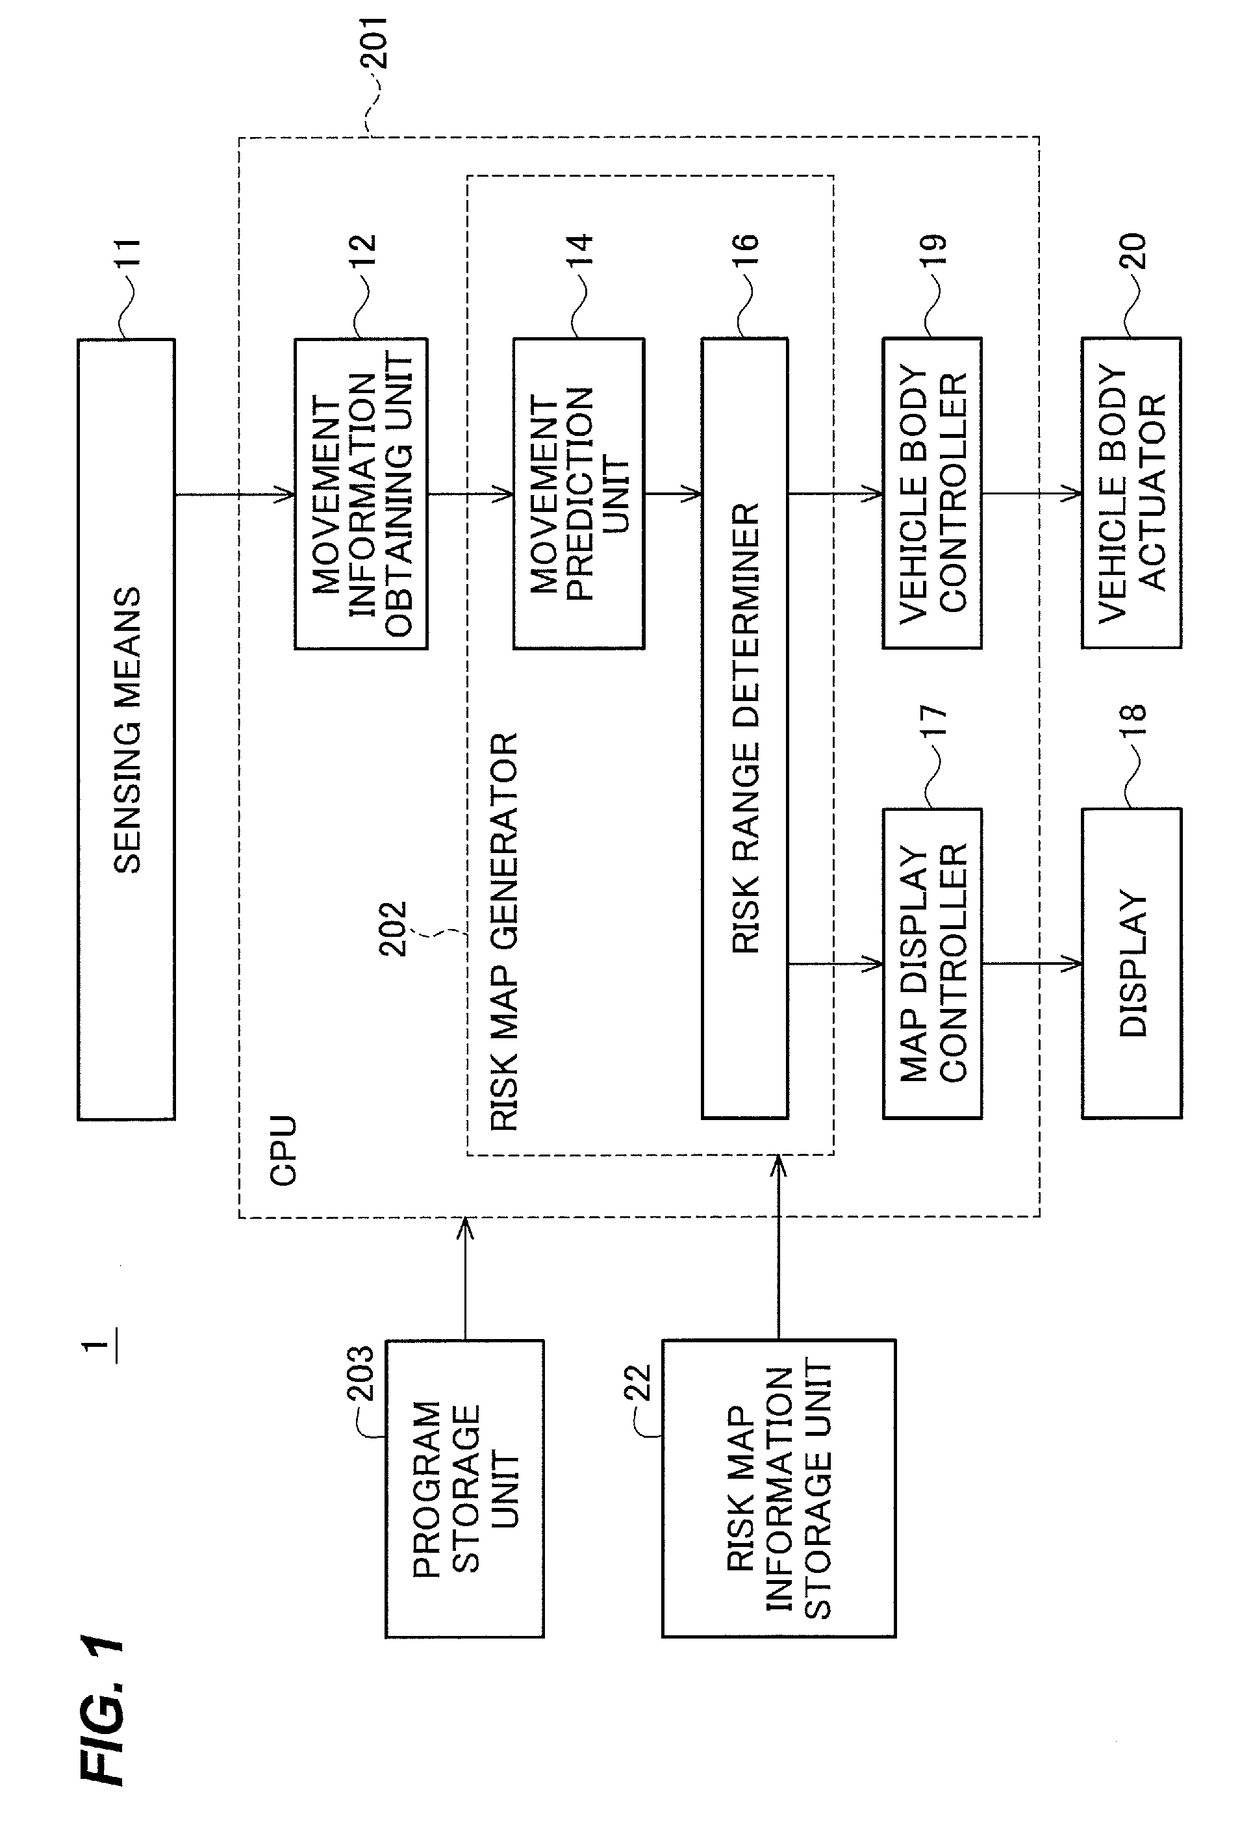 Collision risk calculation device, collision risk display device, and vehicle body control device